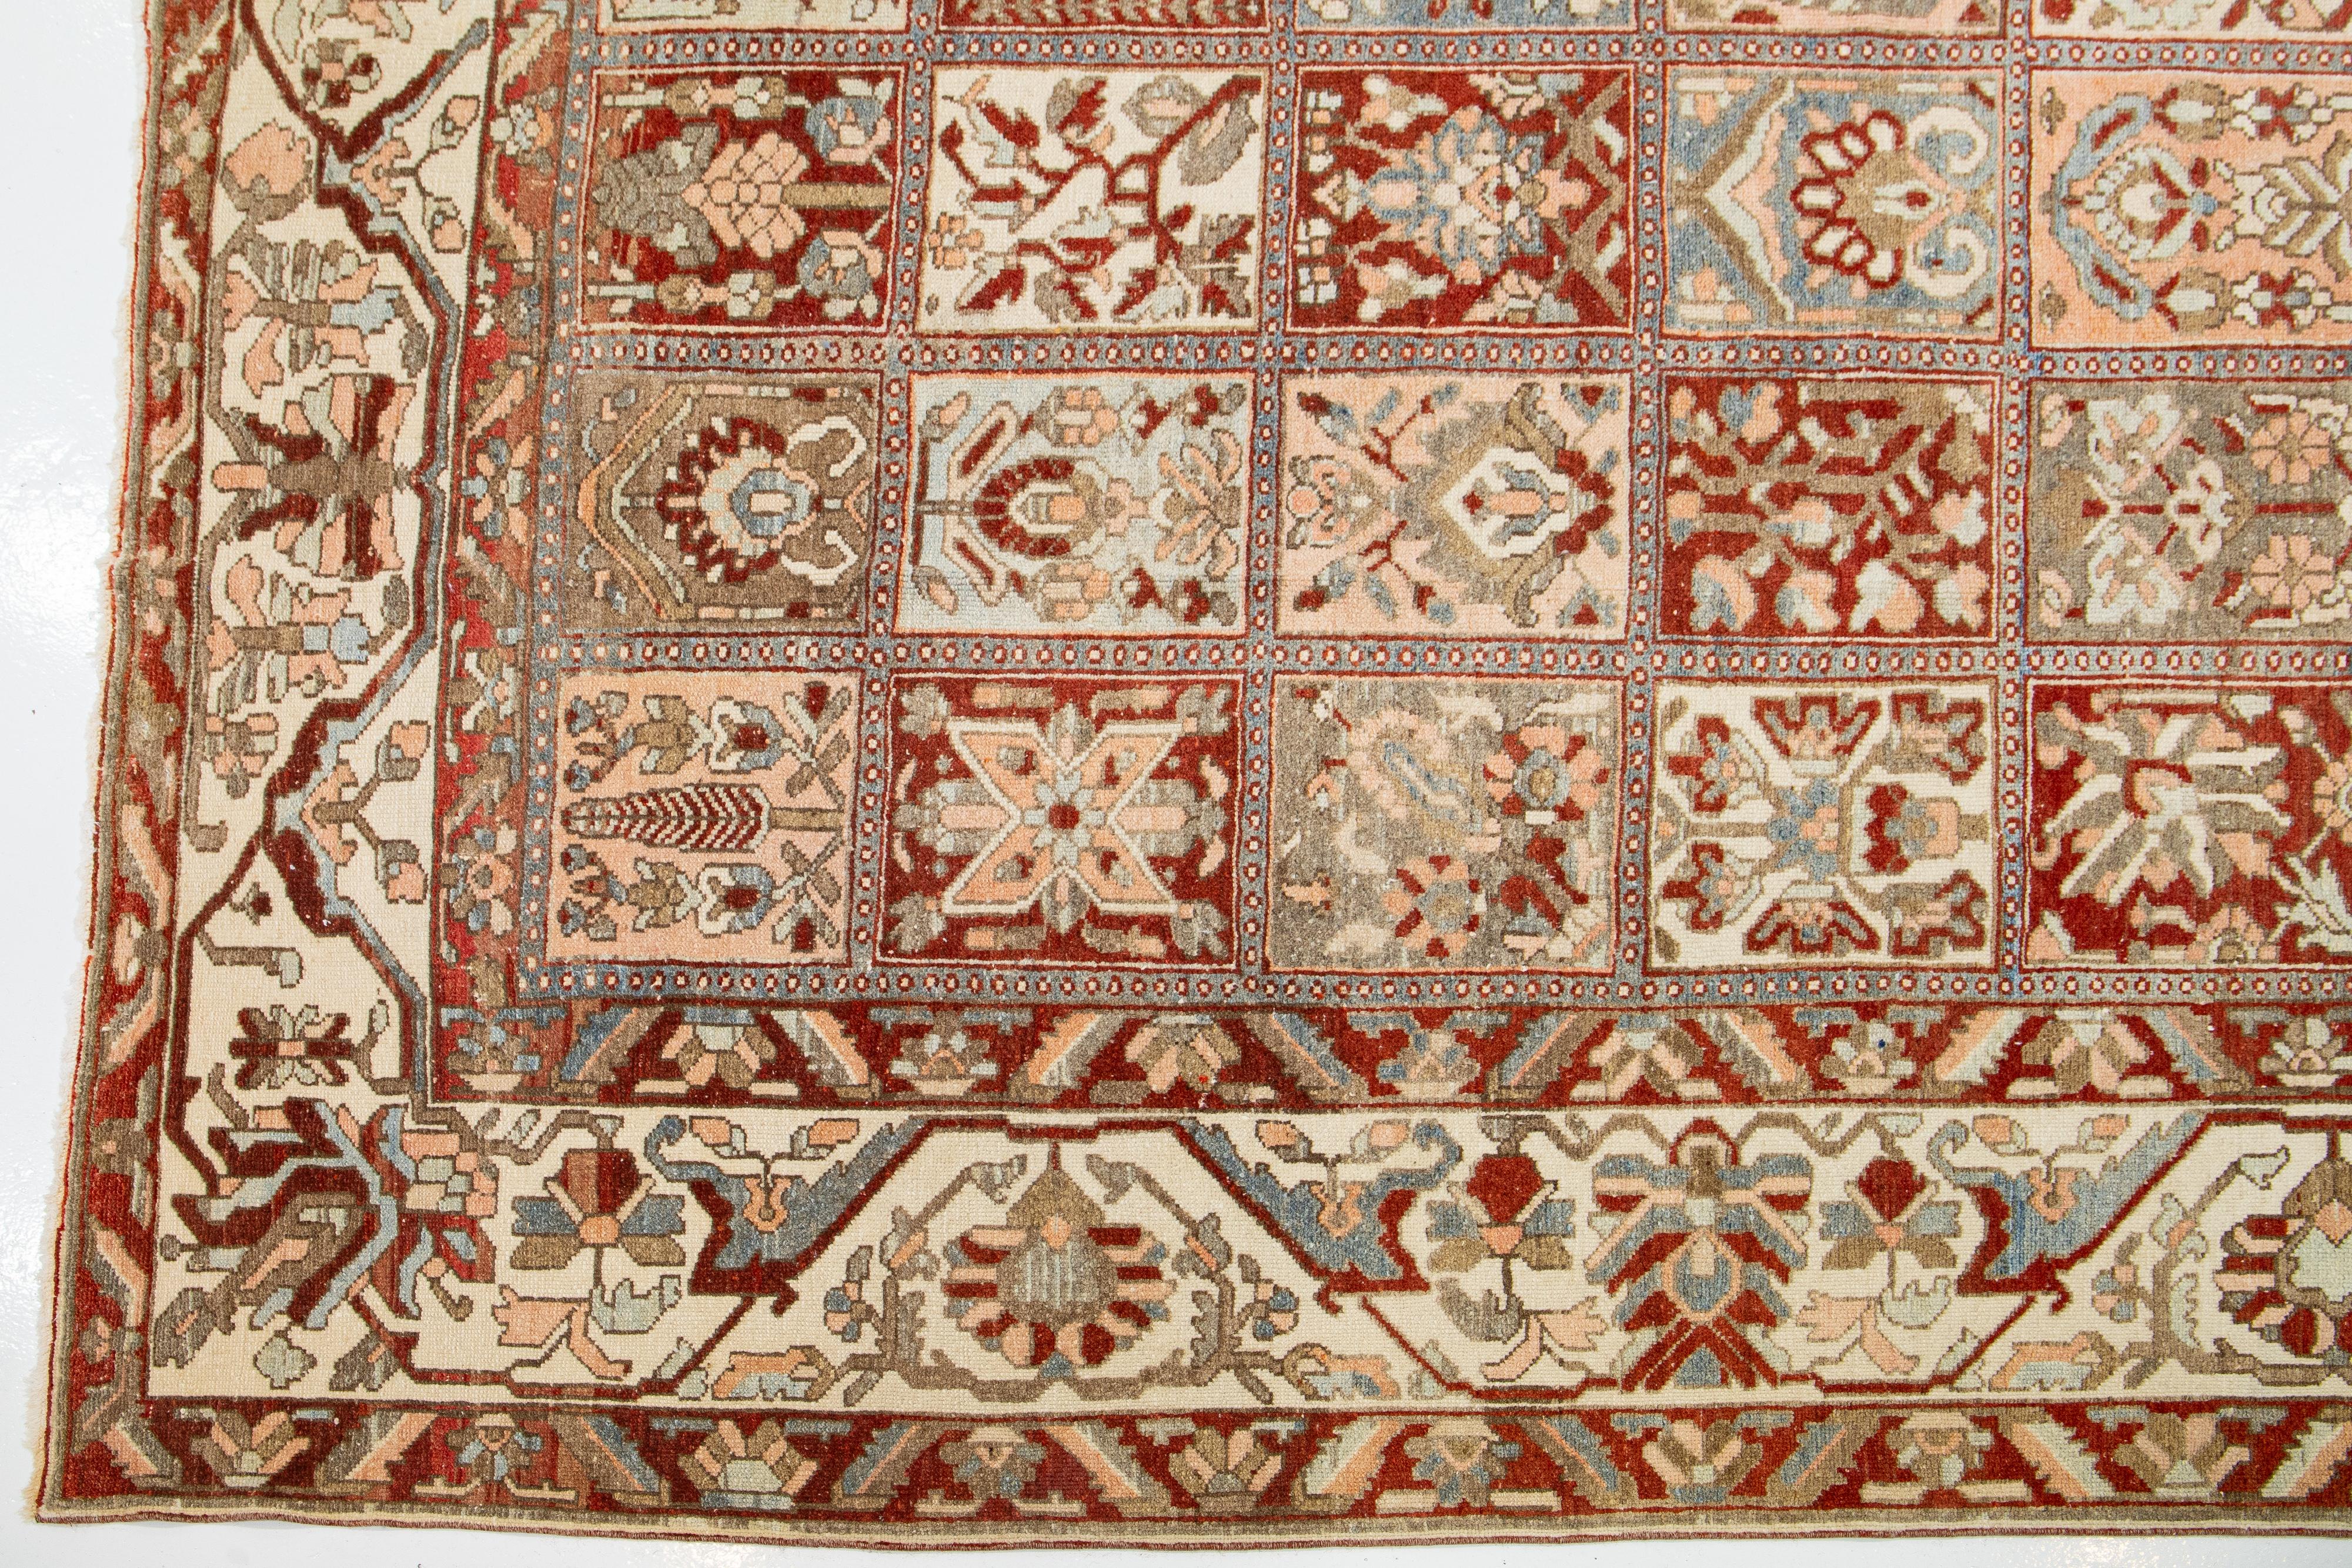 The Floral Persian Bakhtiari Rust Wool Rug Handcrafted in the 1920s (Handgeknüpft) im Angebot